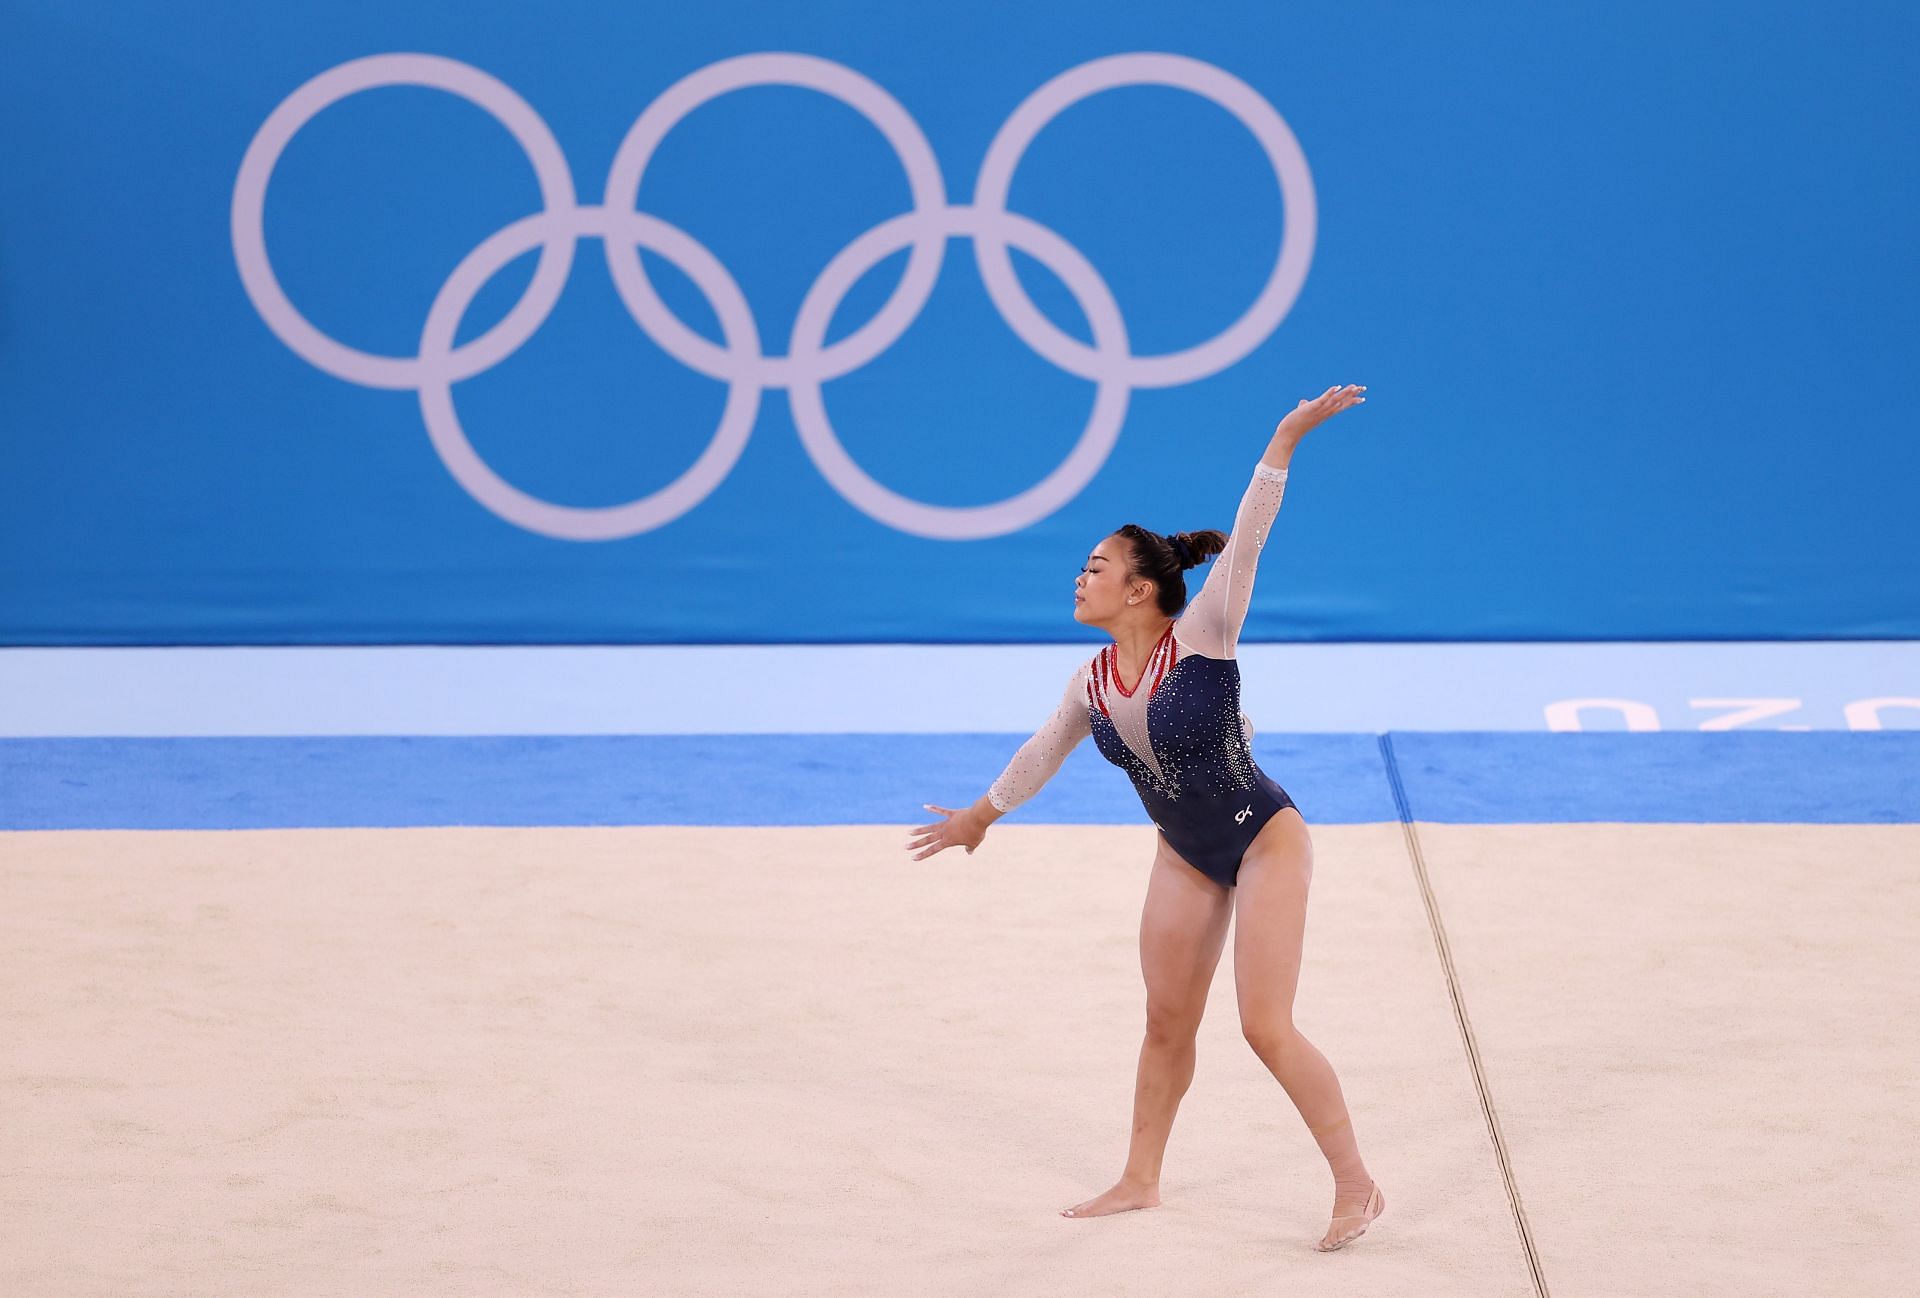 Rebeca Andrade to Zhang Boheng, here are some gymnasts to watch out for